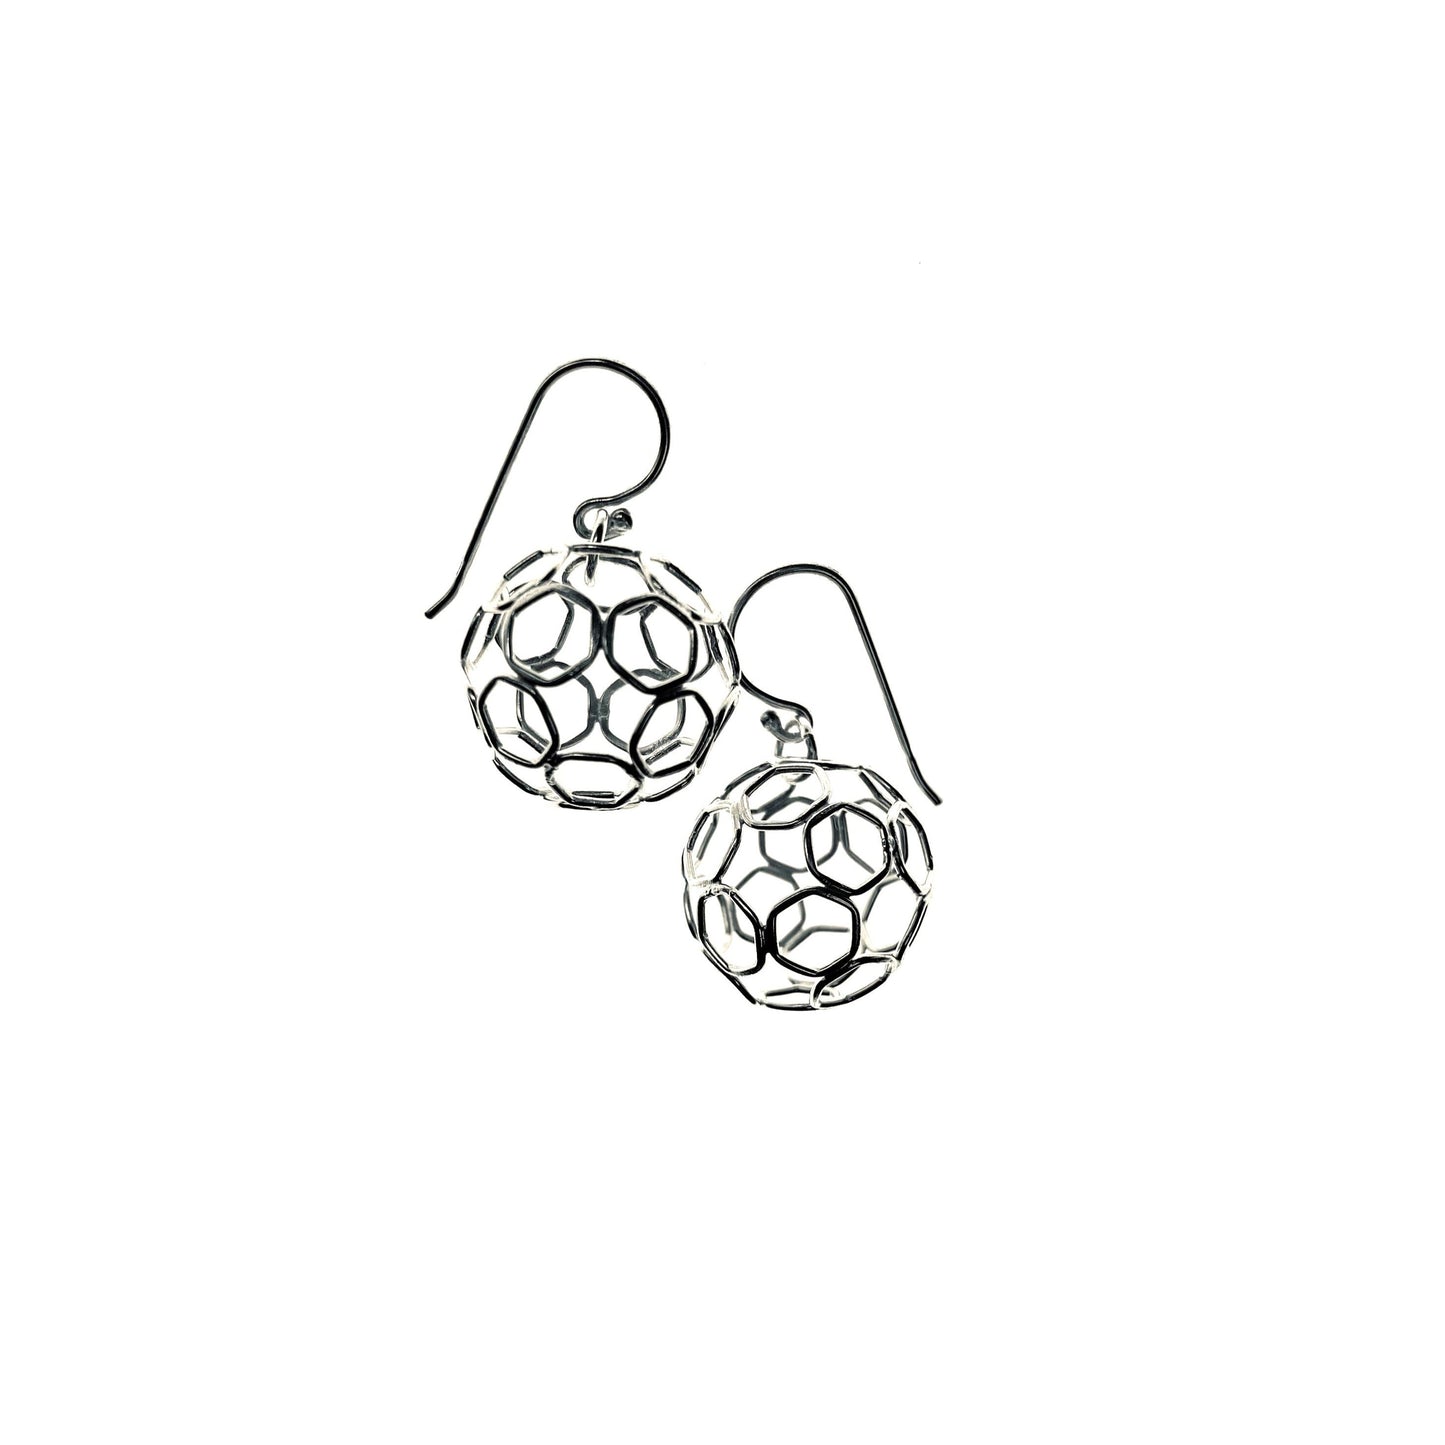 【5% OFF Price】Set of Large Soccer/Football Necklace (thinner chain) and Earrings